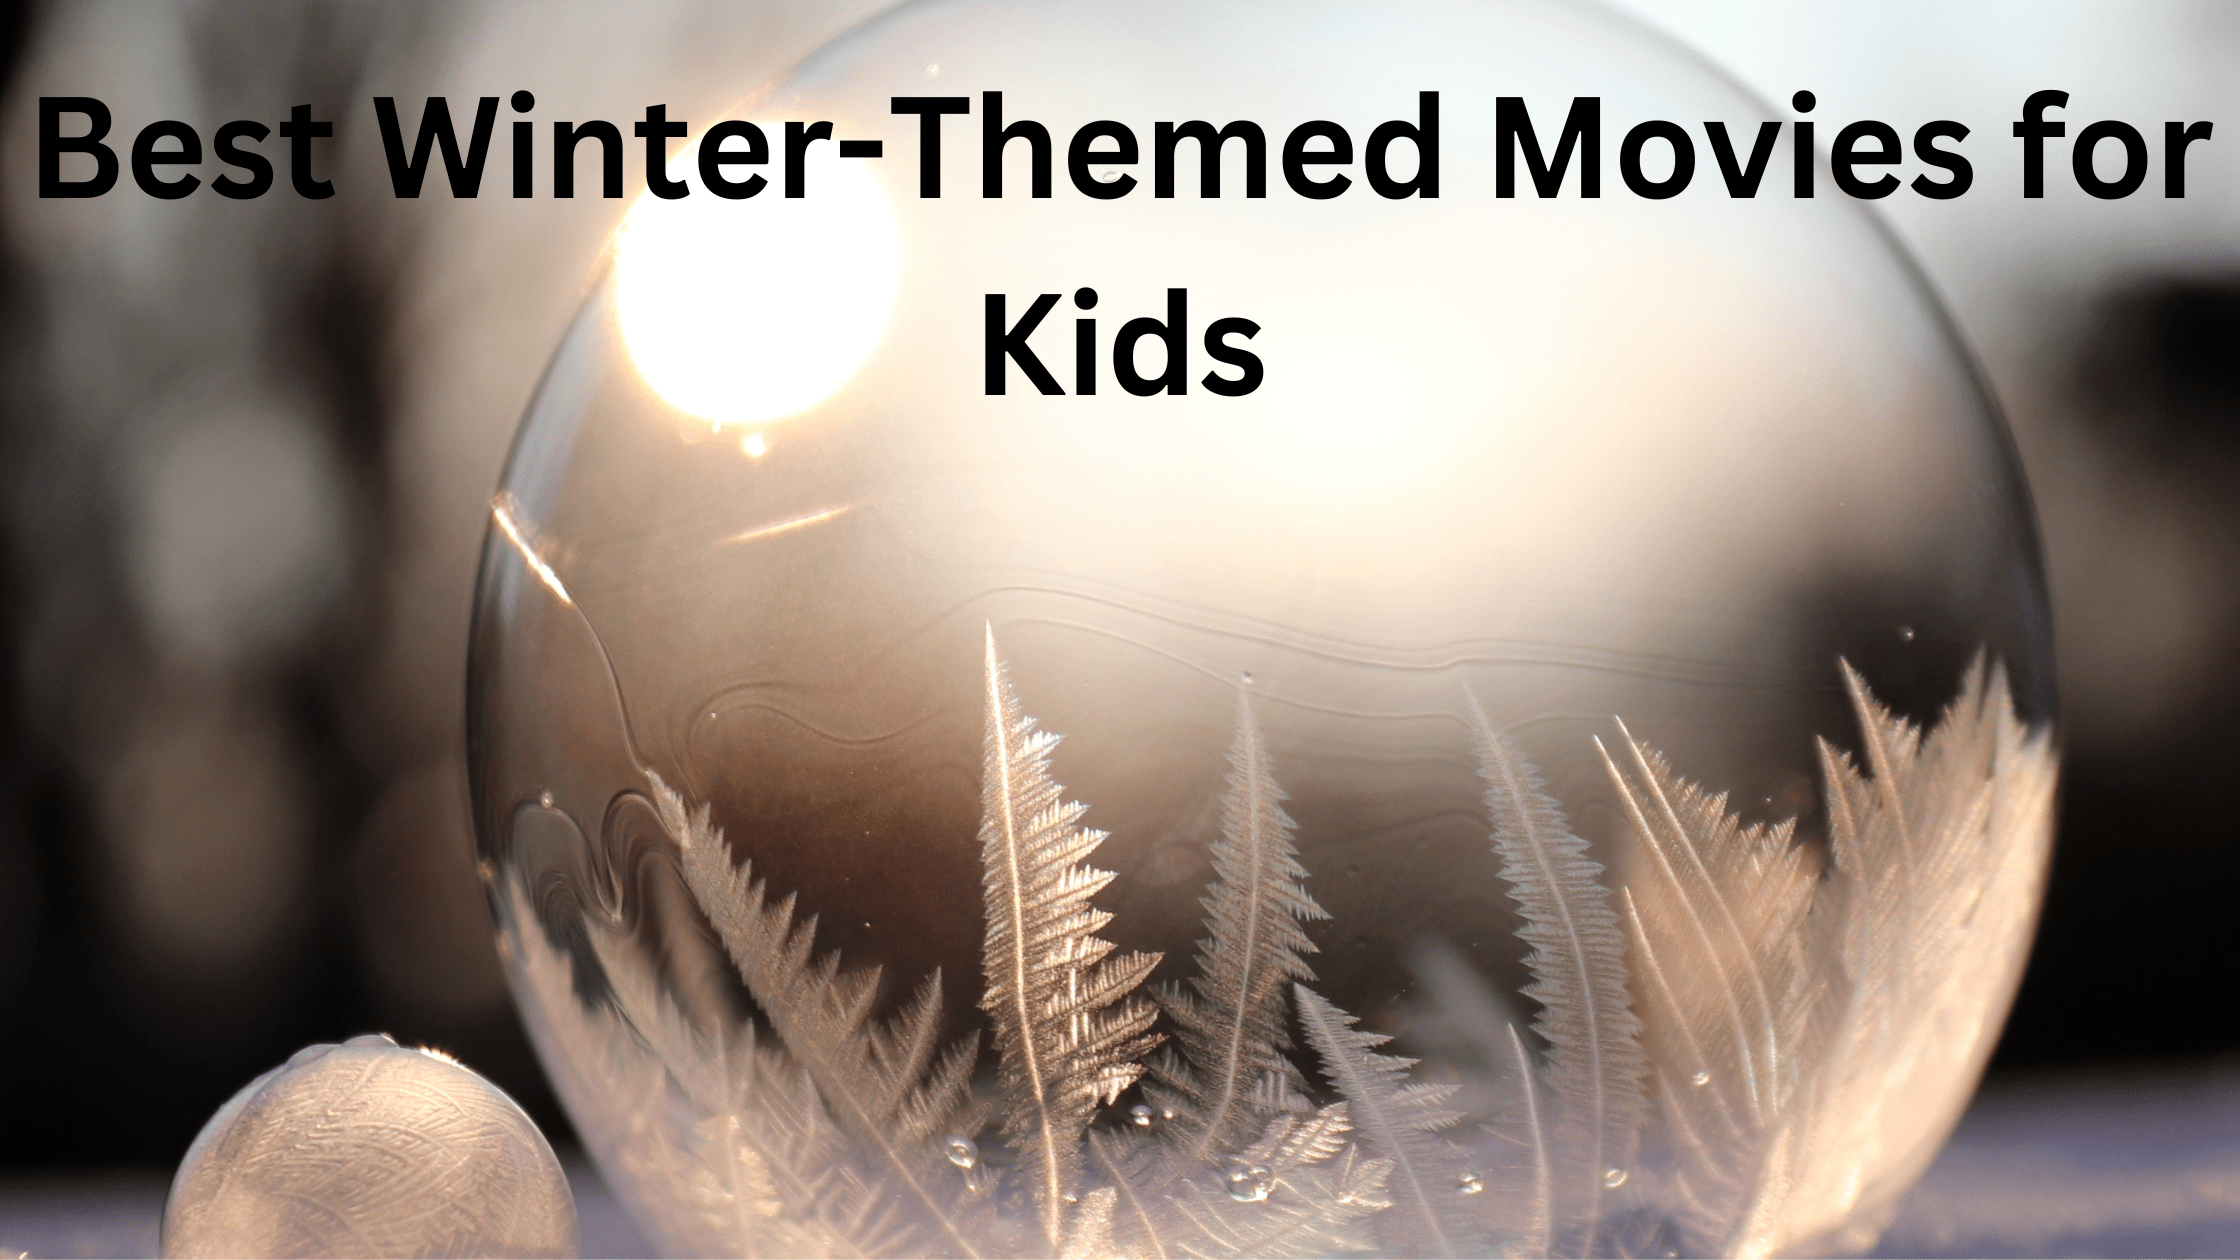 11 Best Winter-Themed Movies for Kids to Watch 18